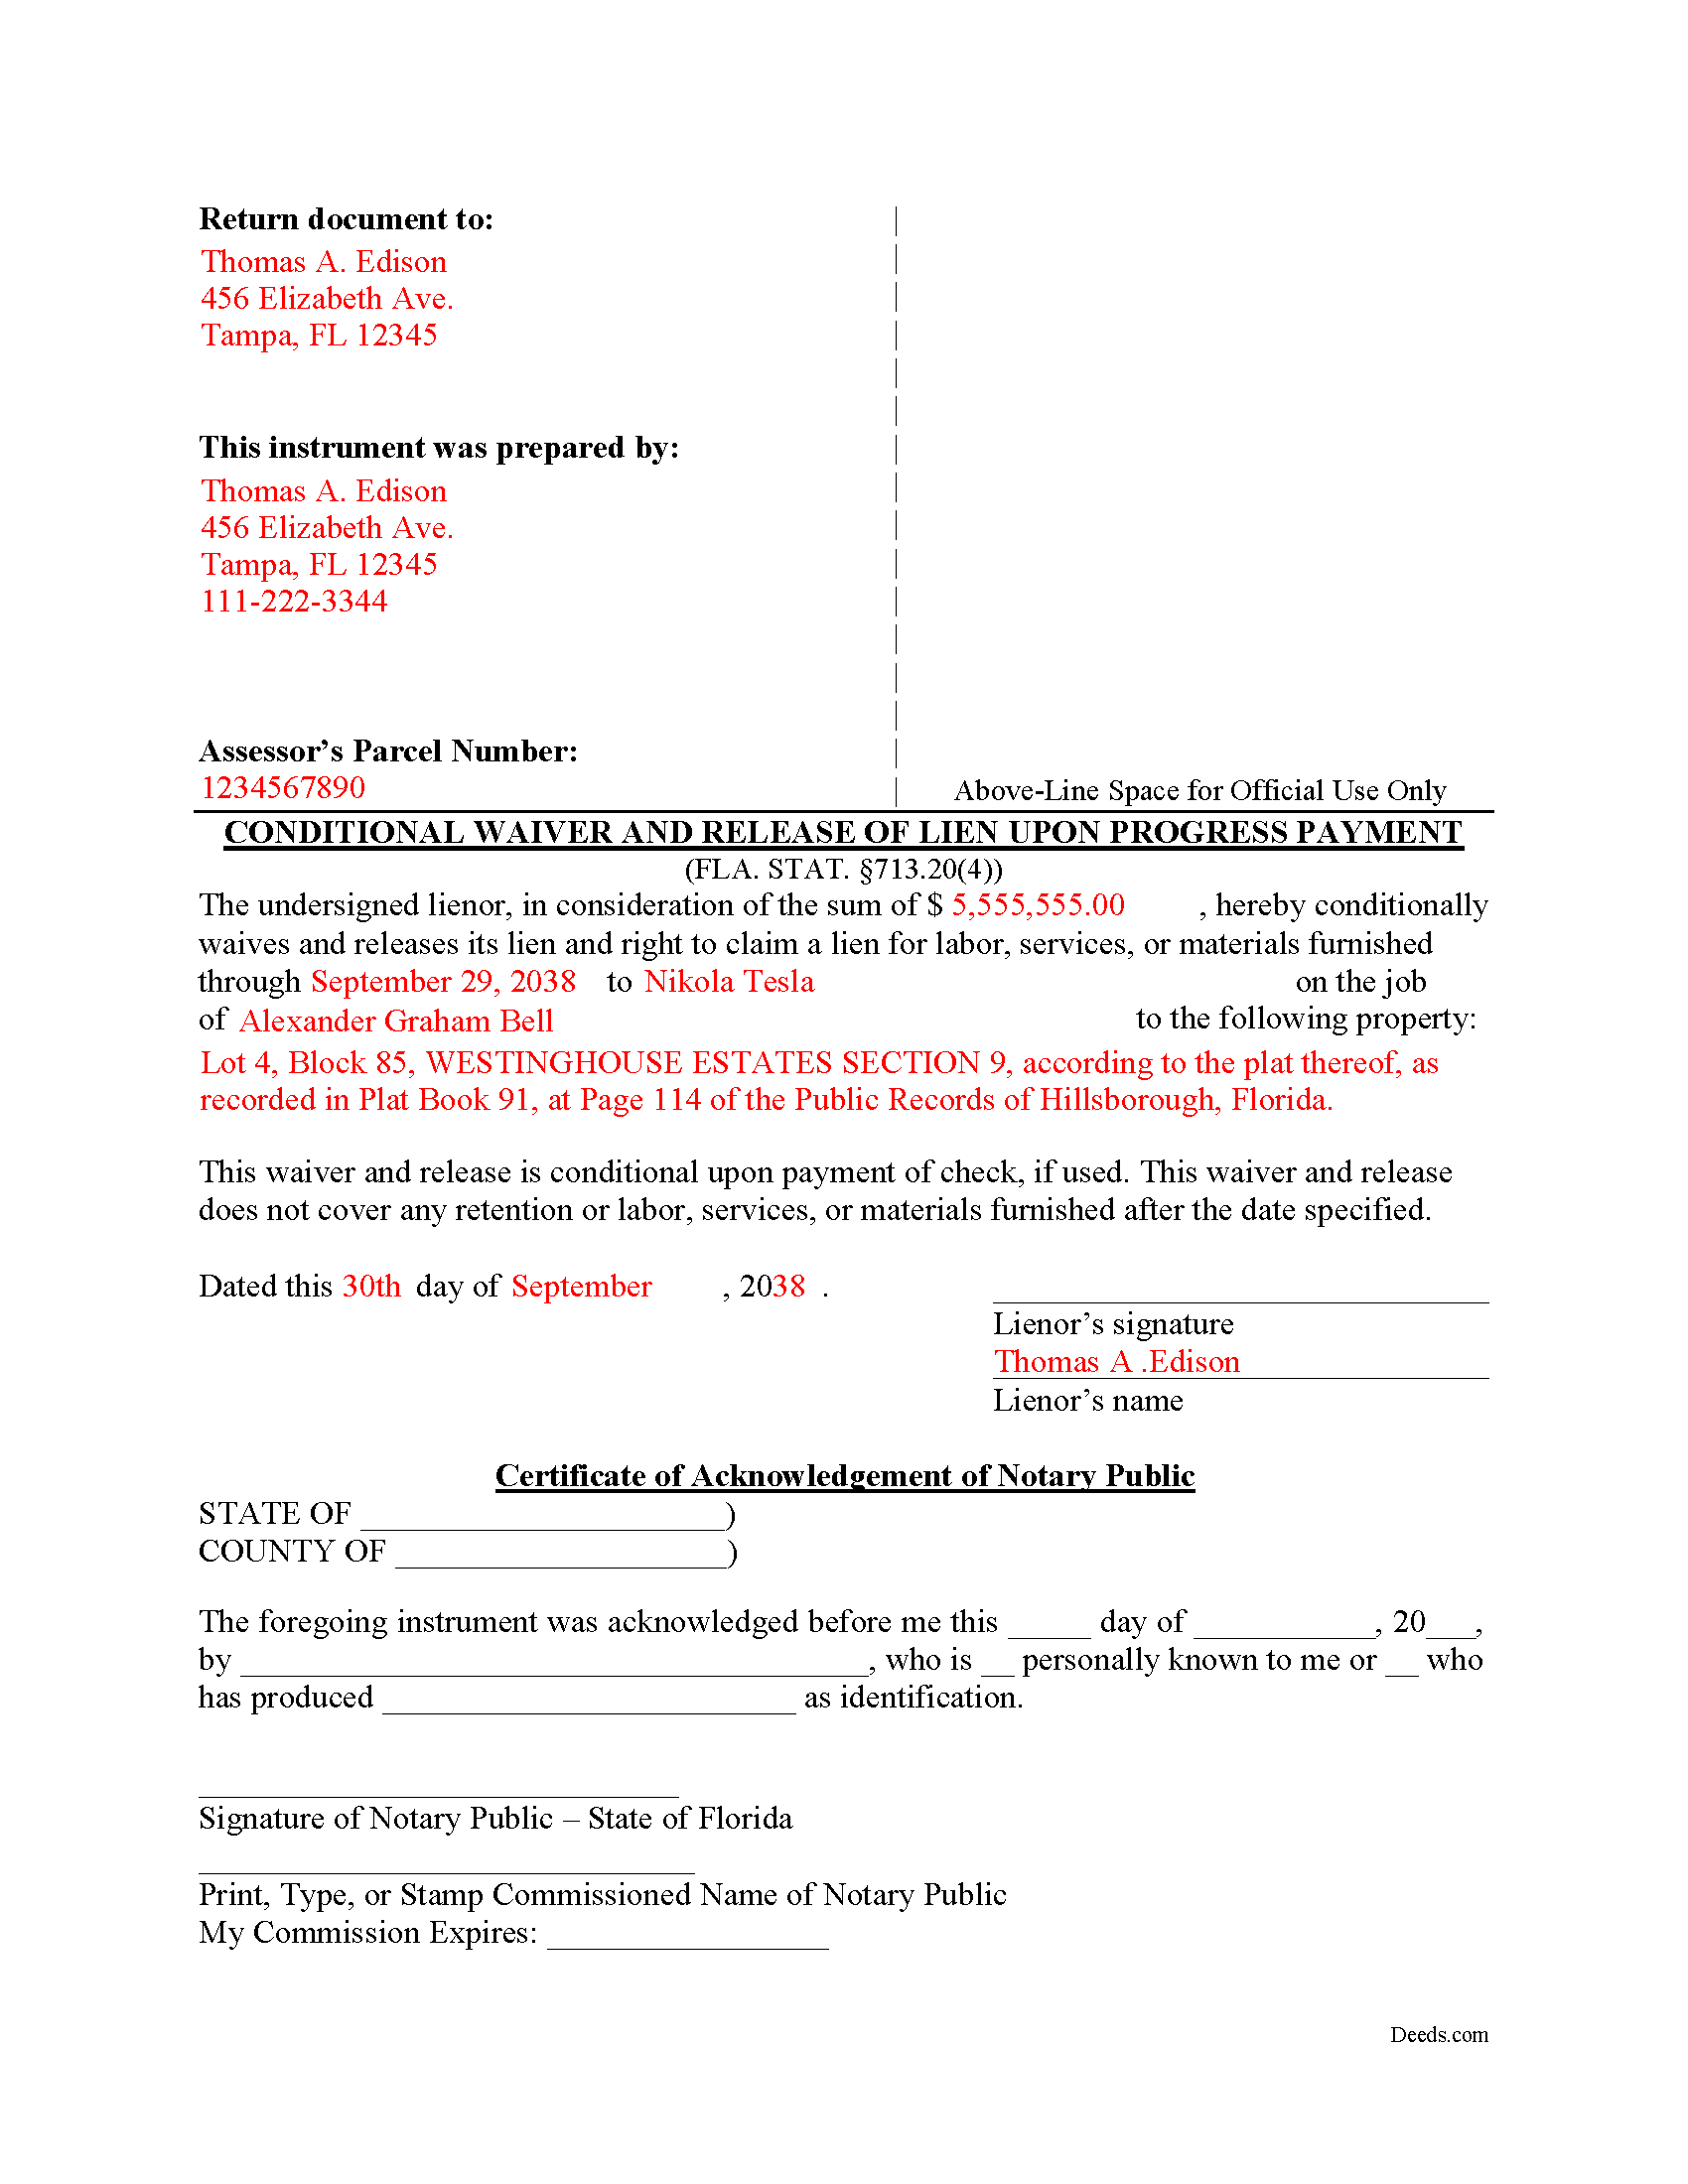 Completed Example of the Conditional Waiver and Release of Lien upon Progress Payment Form